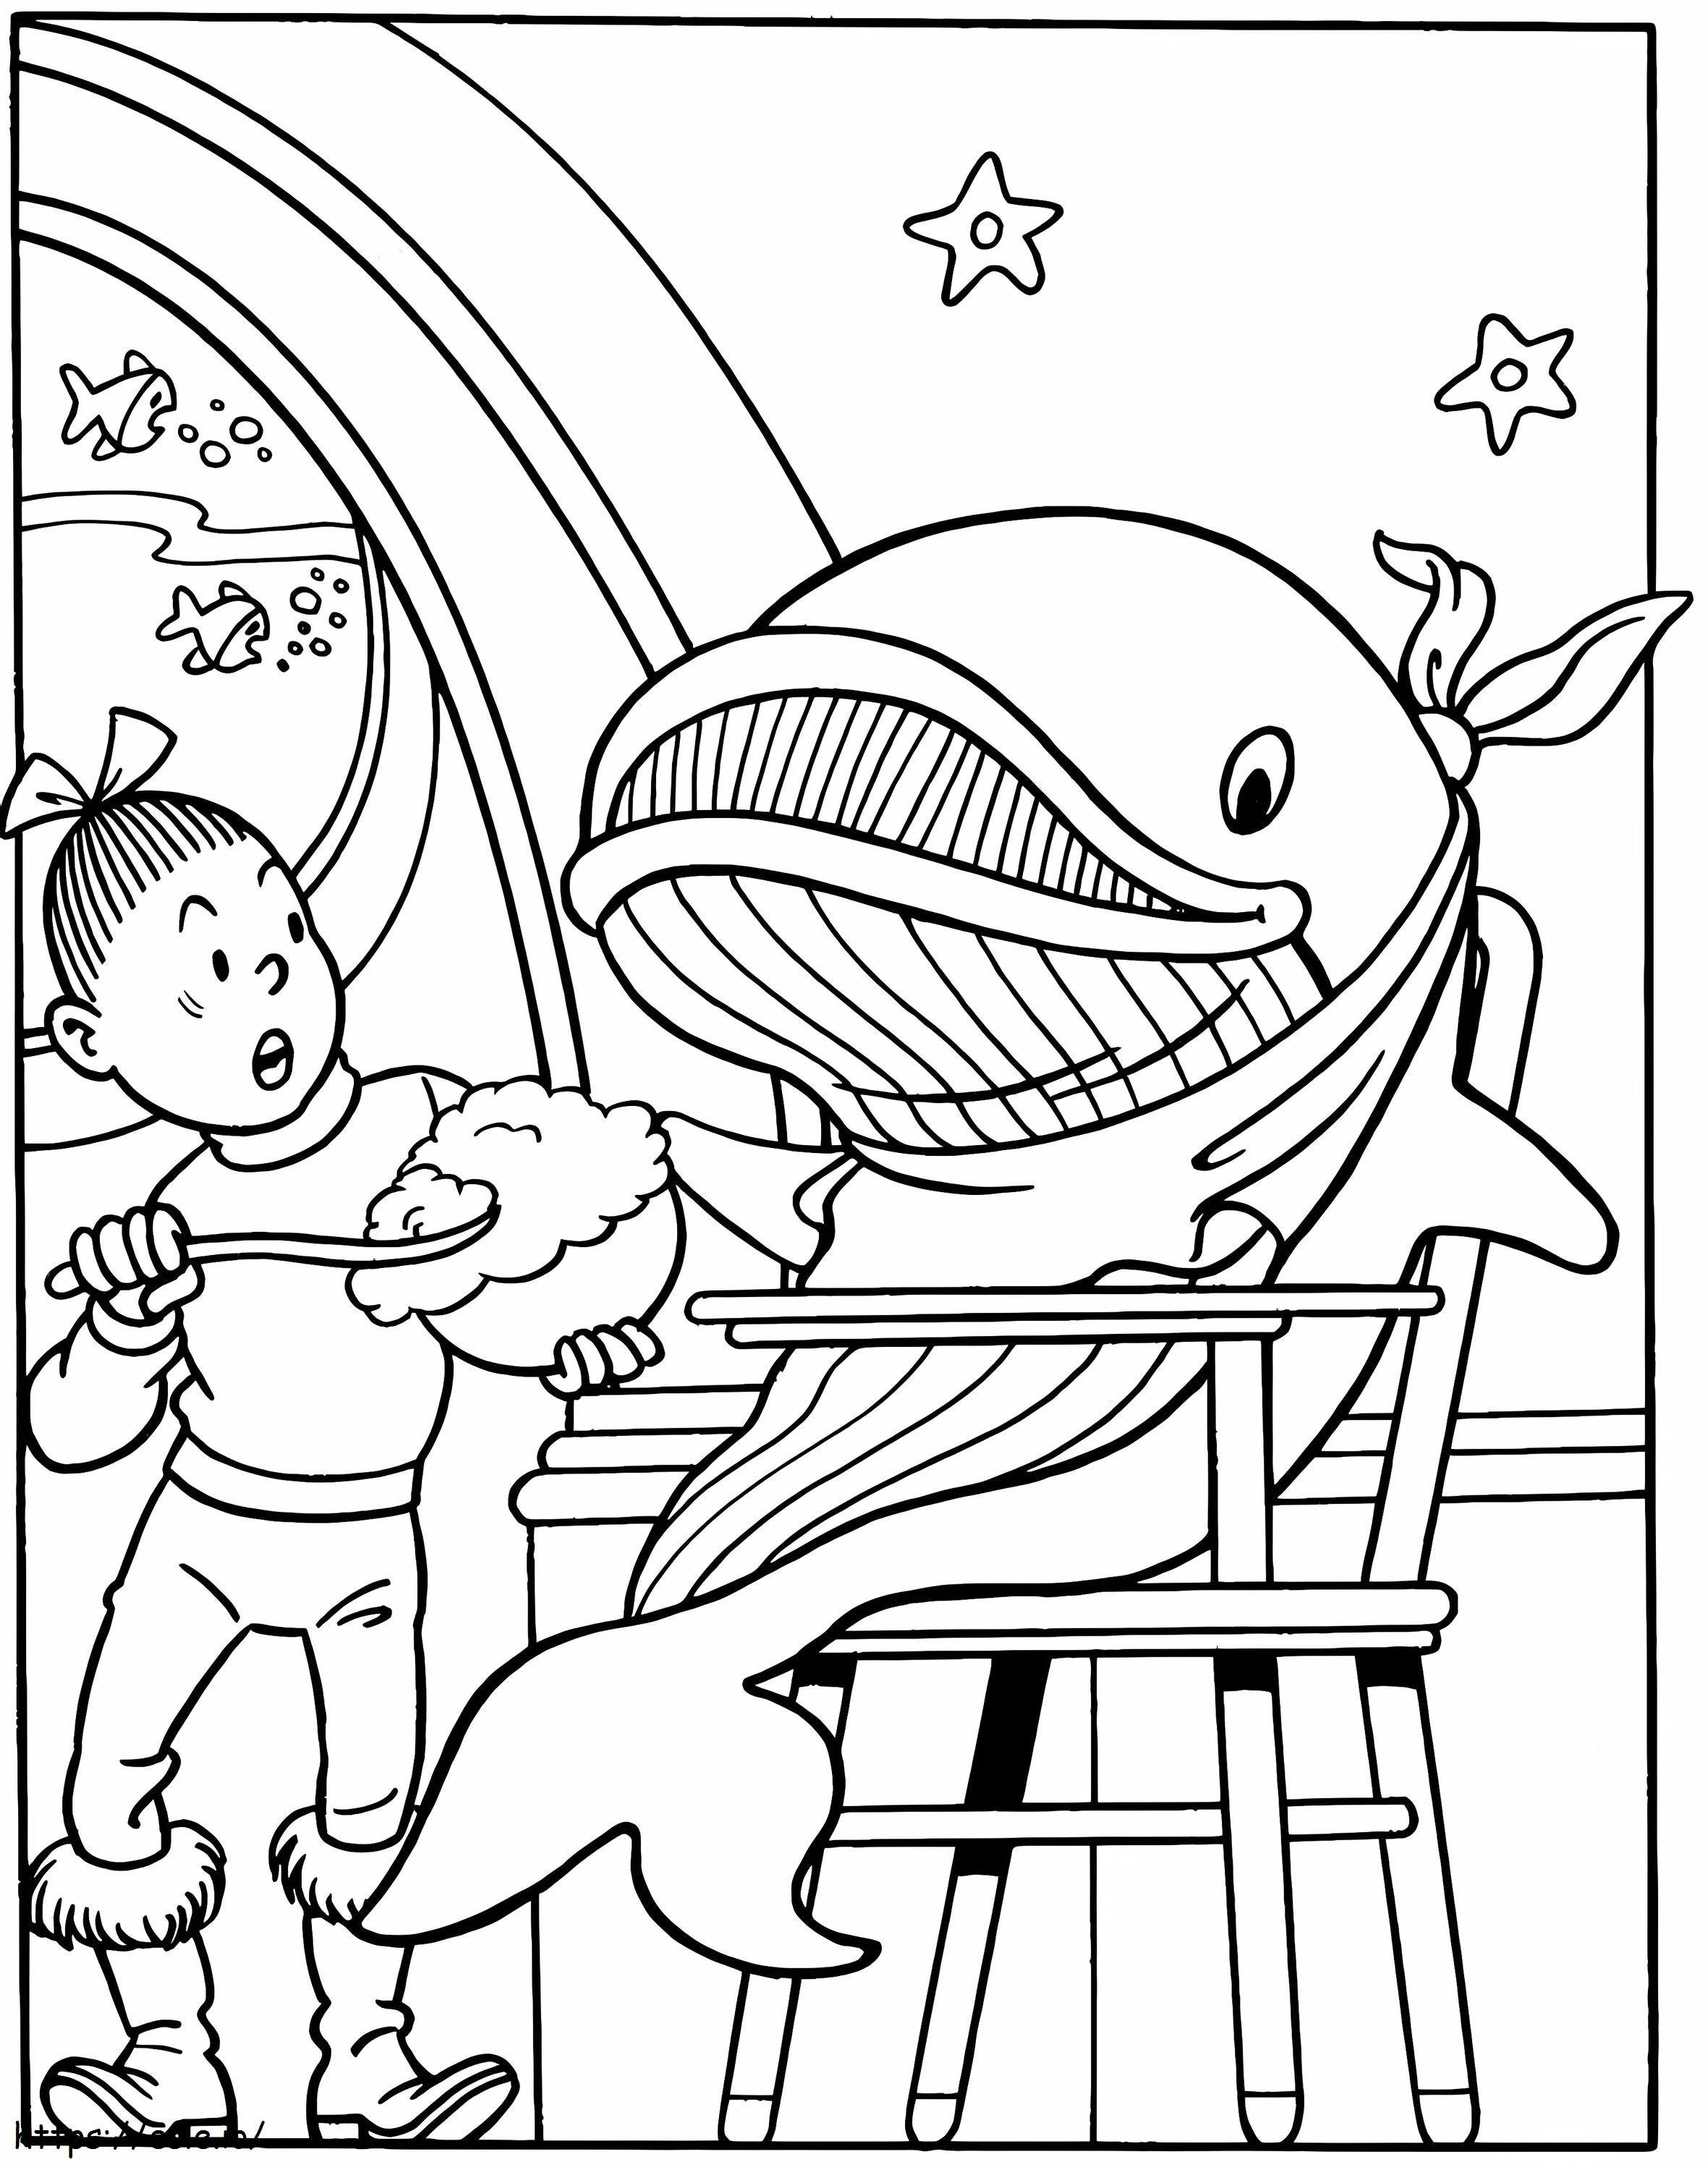 Spike And Suzy 6 coloring page